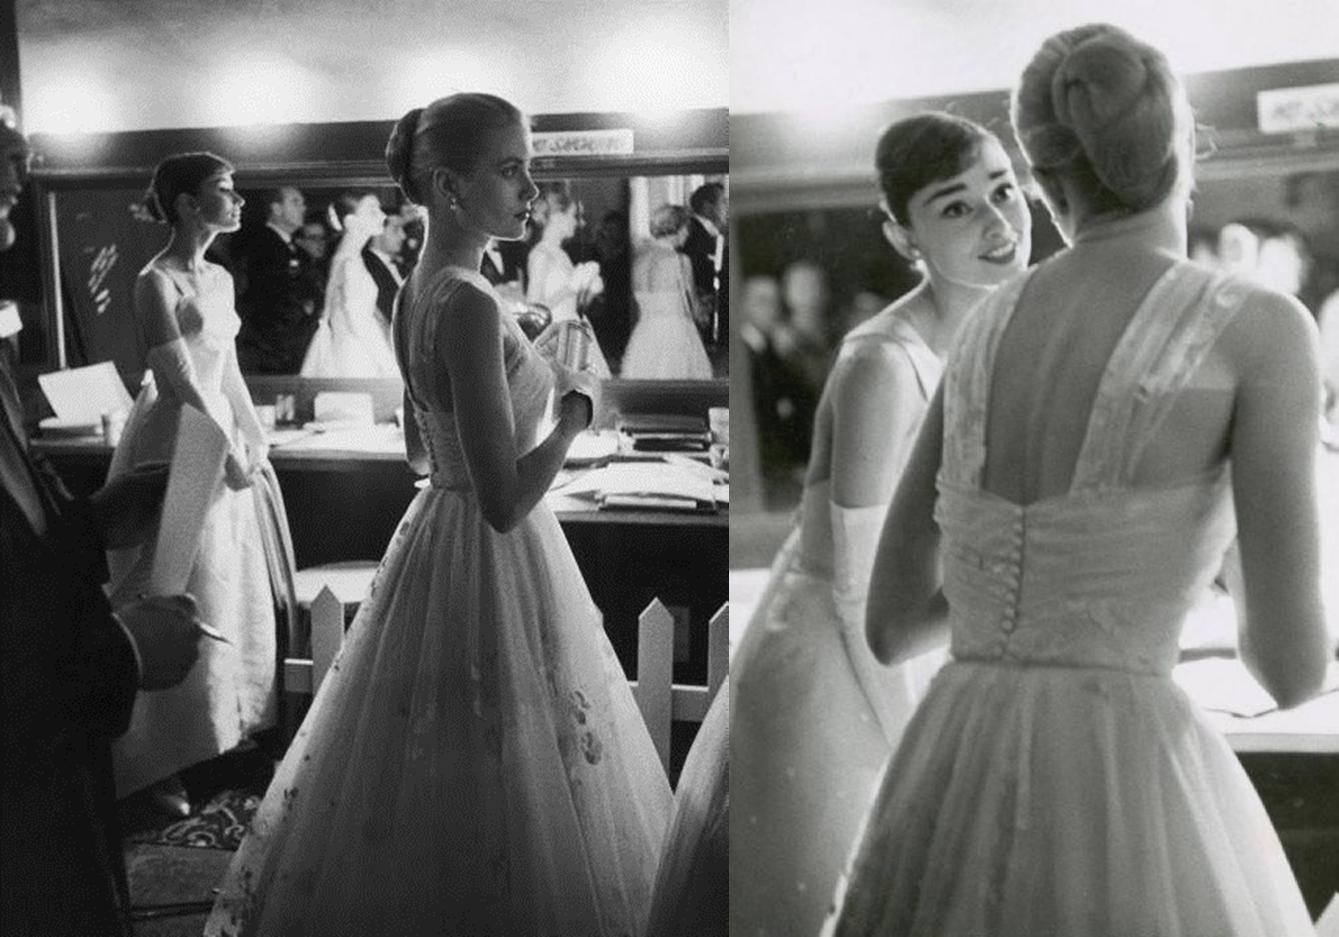 Audrey Hepburn and Grace Kelly backstage at the Oscars.